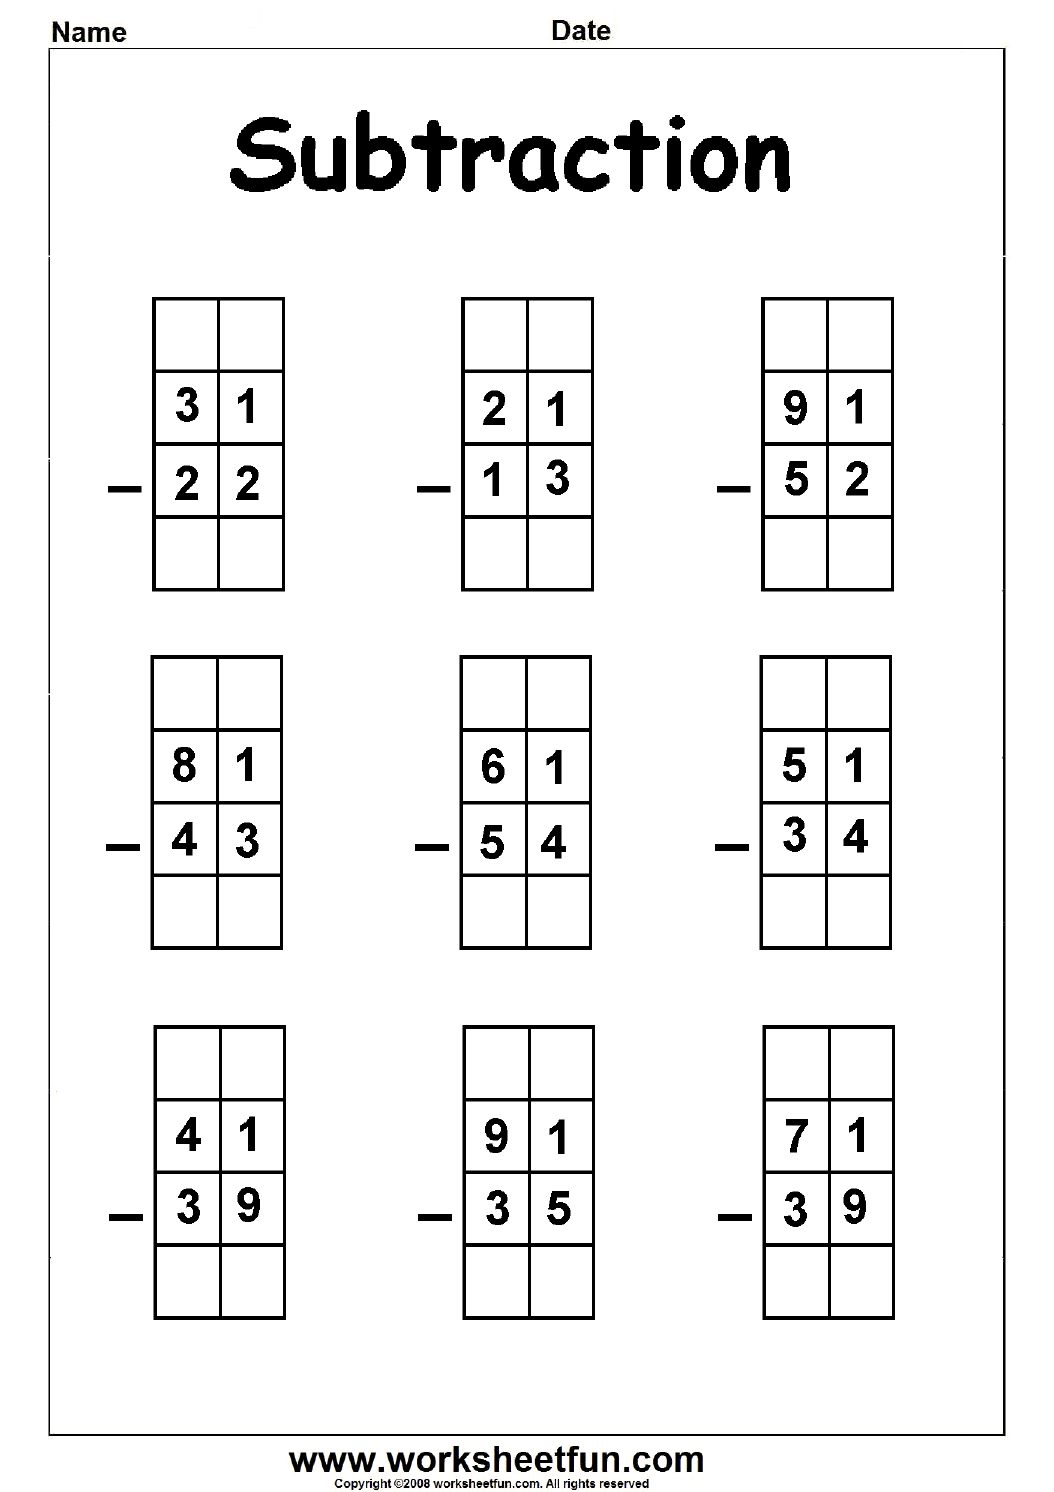 12-best-images-of-subtraction-cut-and-paste-worksheets-cut-and-paste-number-line-worksheet